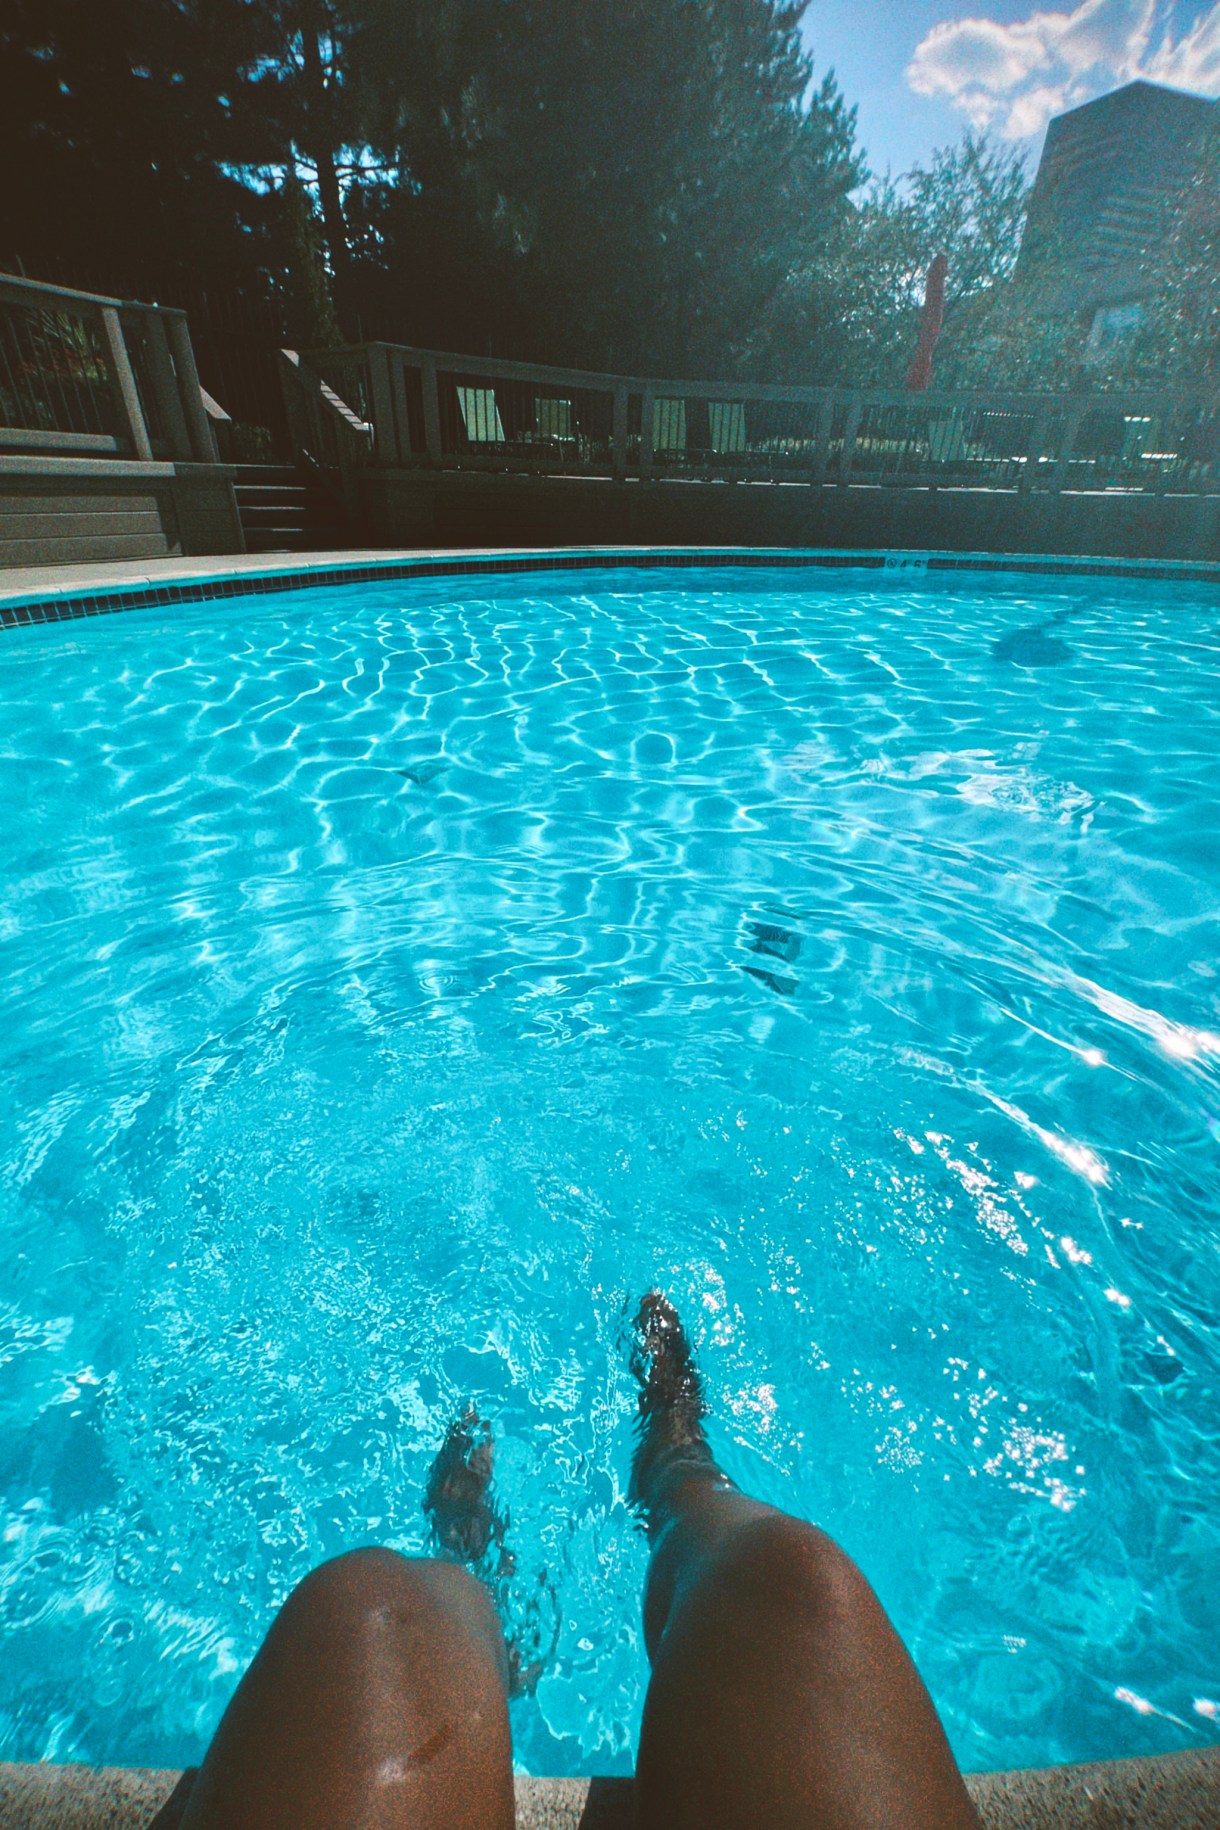 a photo taken from Carmen's perspective of her legs splashing in a pool